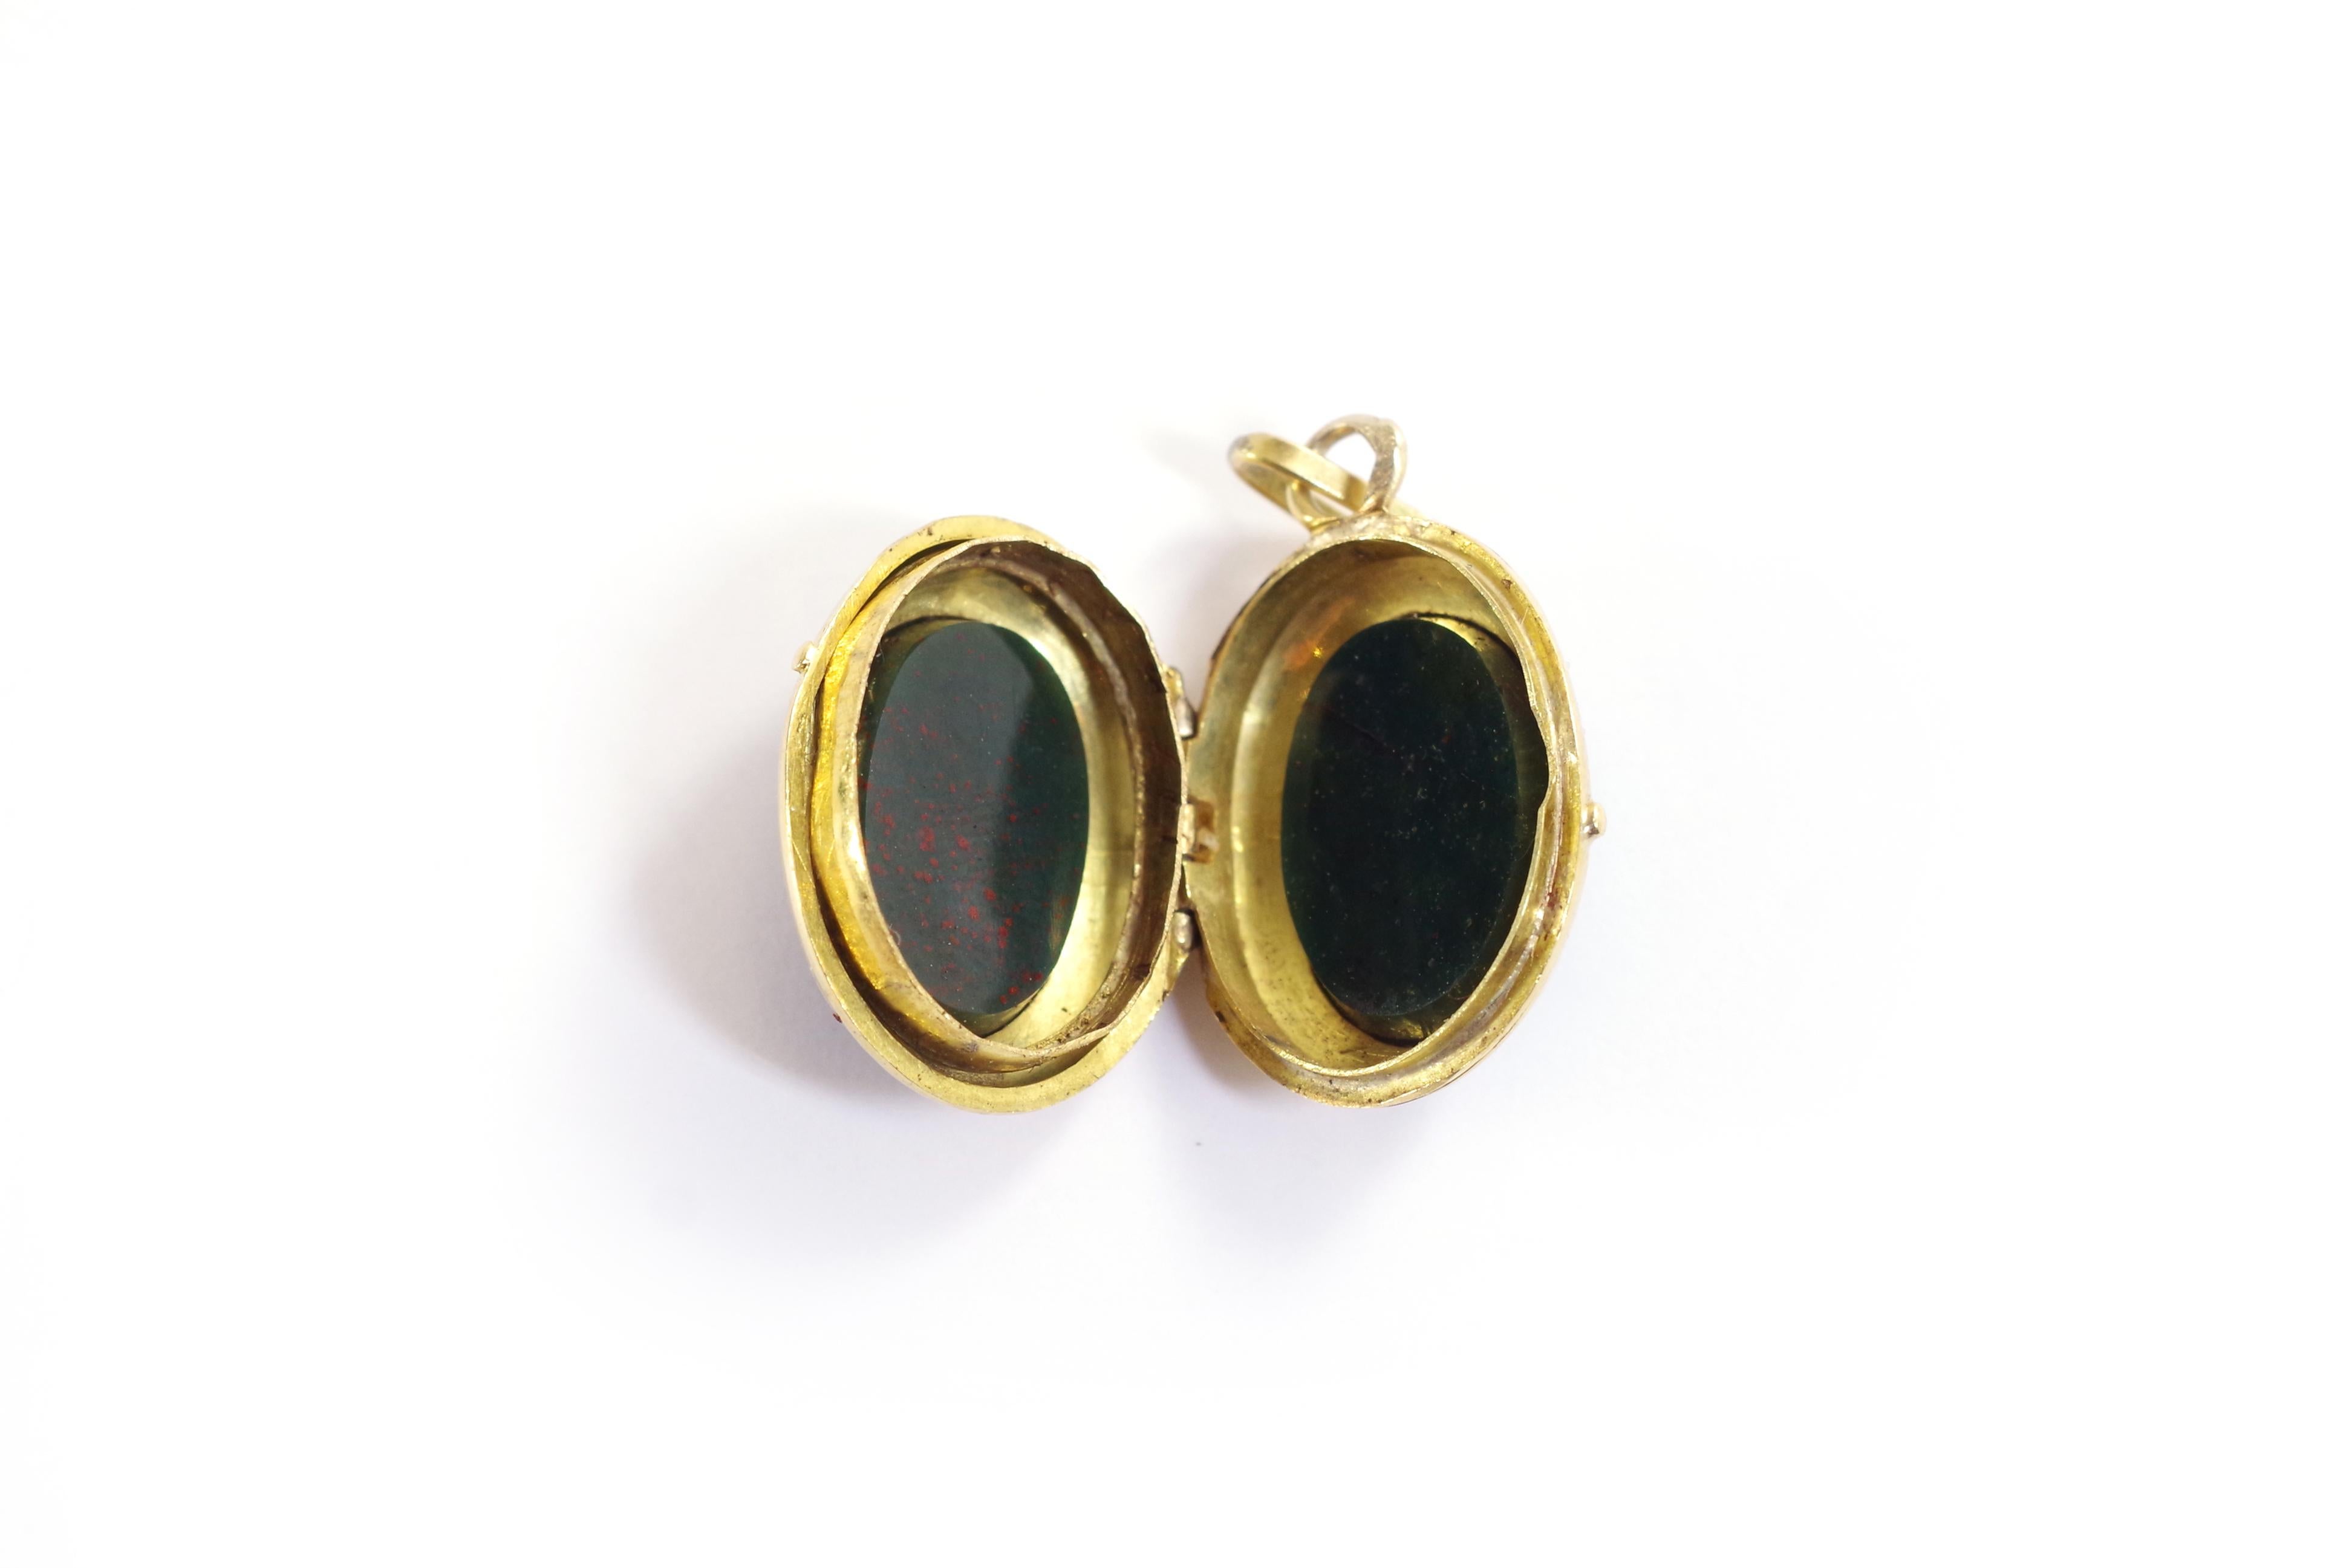 Retro bloodstone locket pendant in gold 18 karats. Vintage pendant locket from the 1940s/50s, set with bloodstone cabochons on each side. The bloodstone, also called 